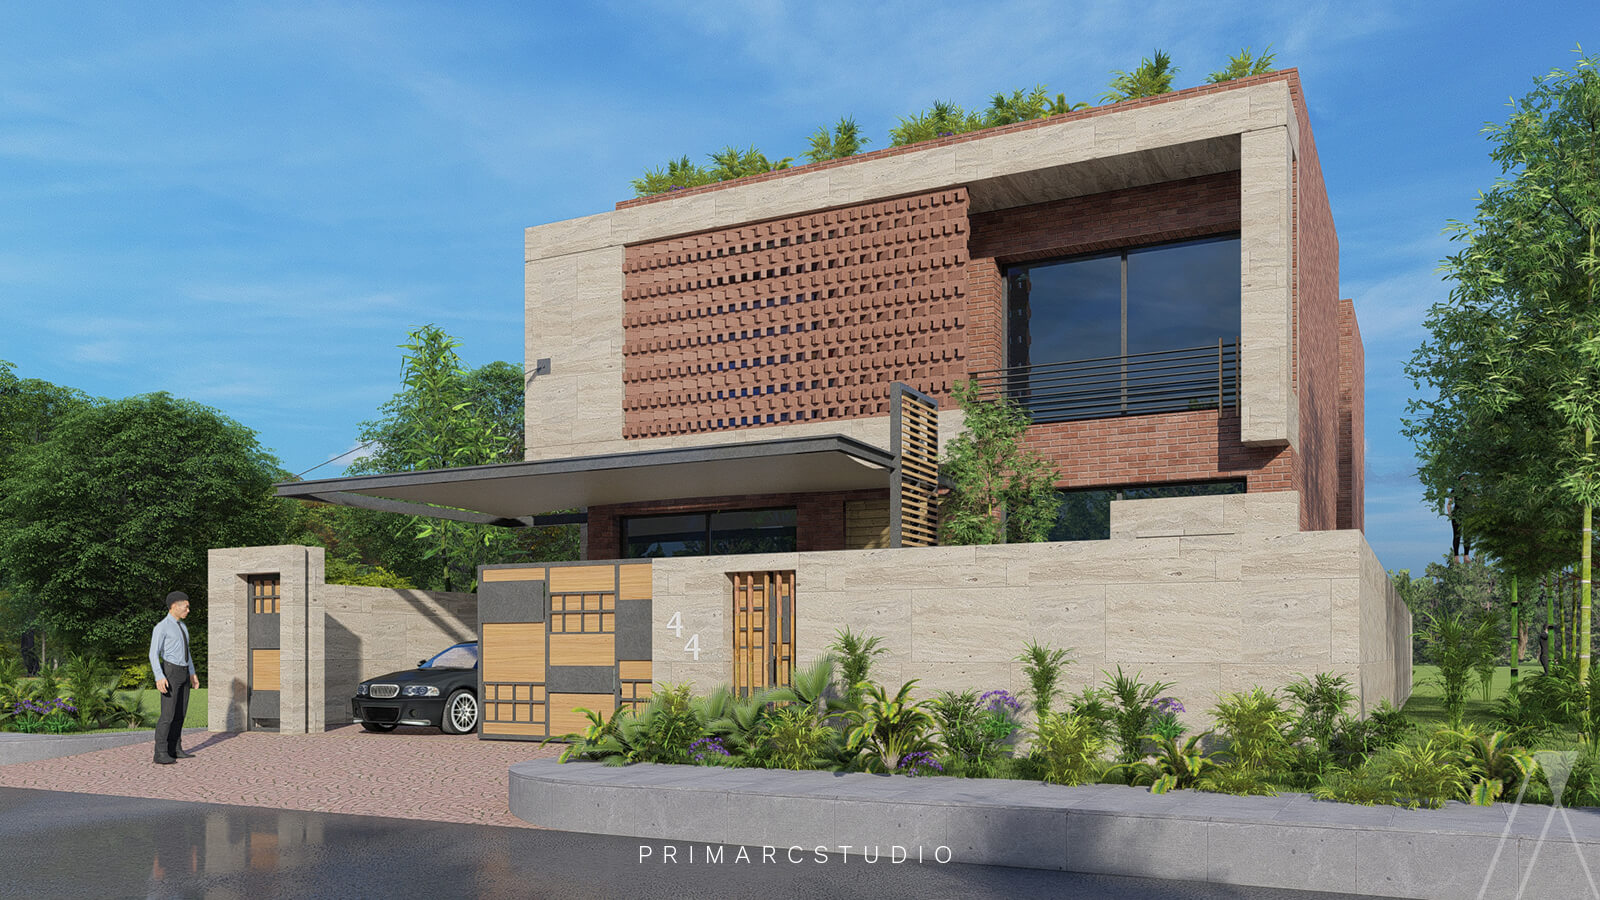 Shams House - DHA Phase II Modern brick house render by architects in islamabad